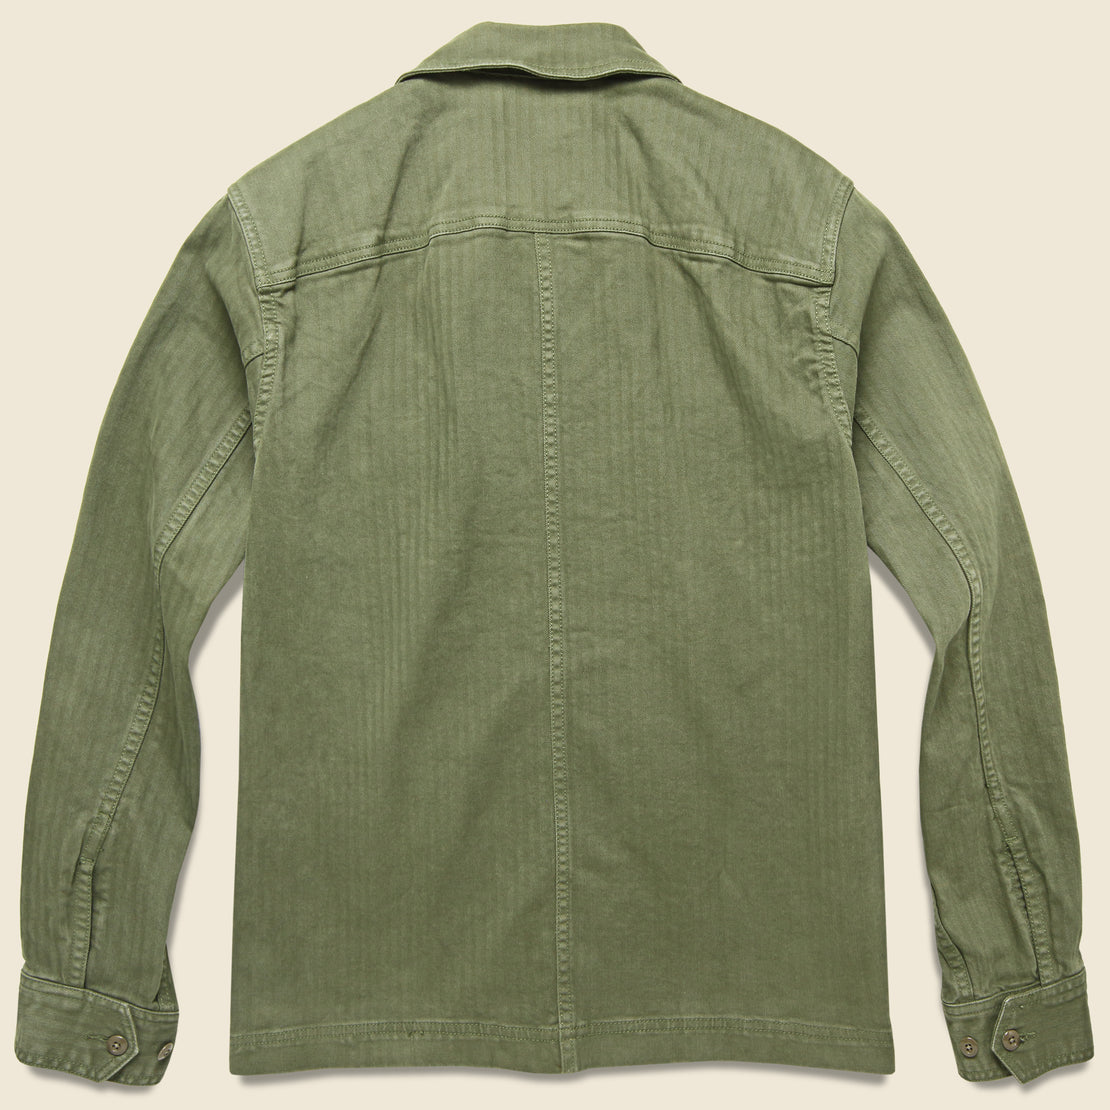 Herringbone Army Jacket - Olive - Alex Mill - STAG Provisions - Outerwear - Coat / Jacket